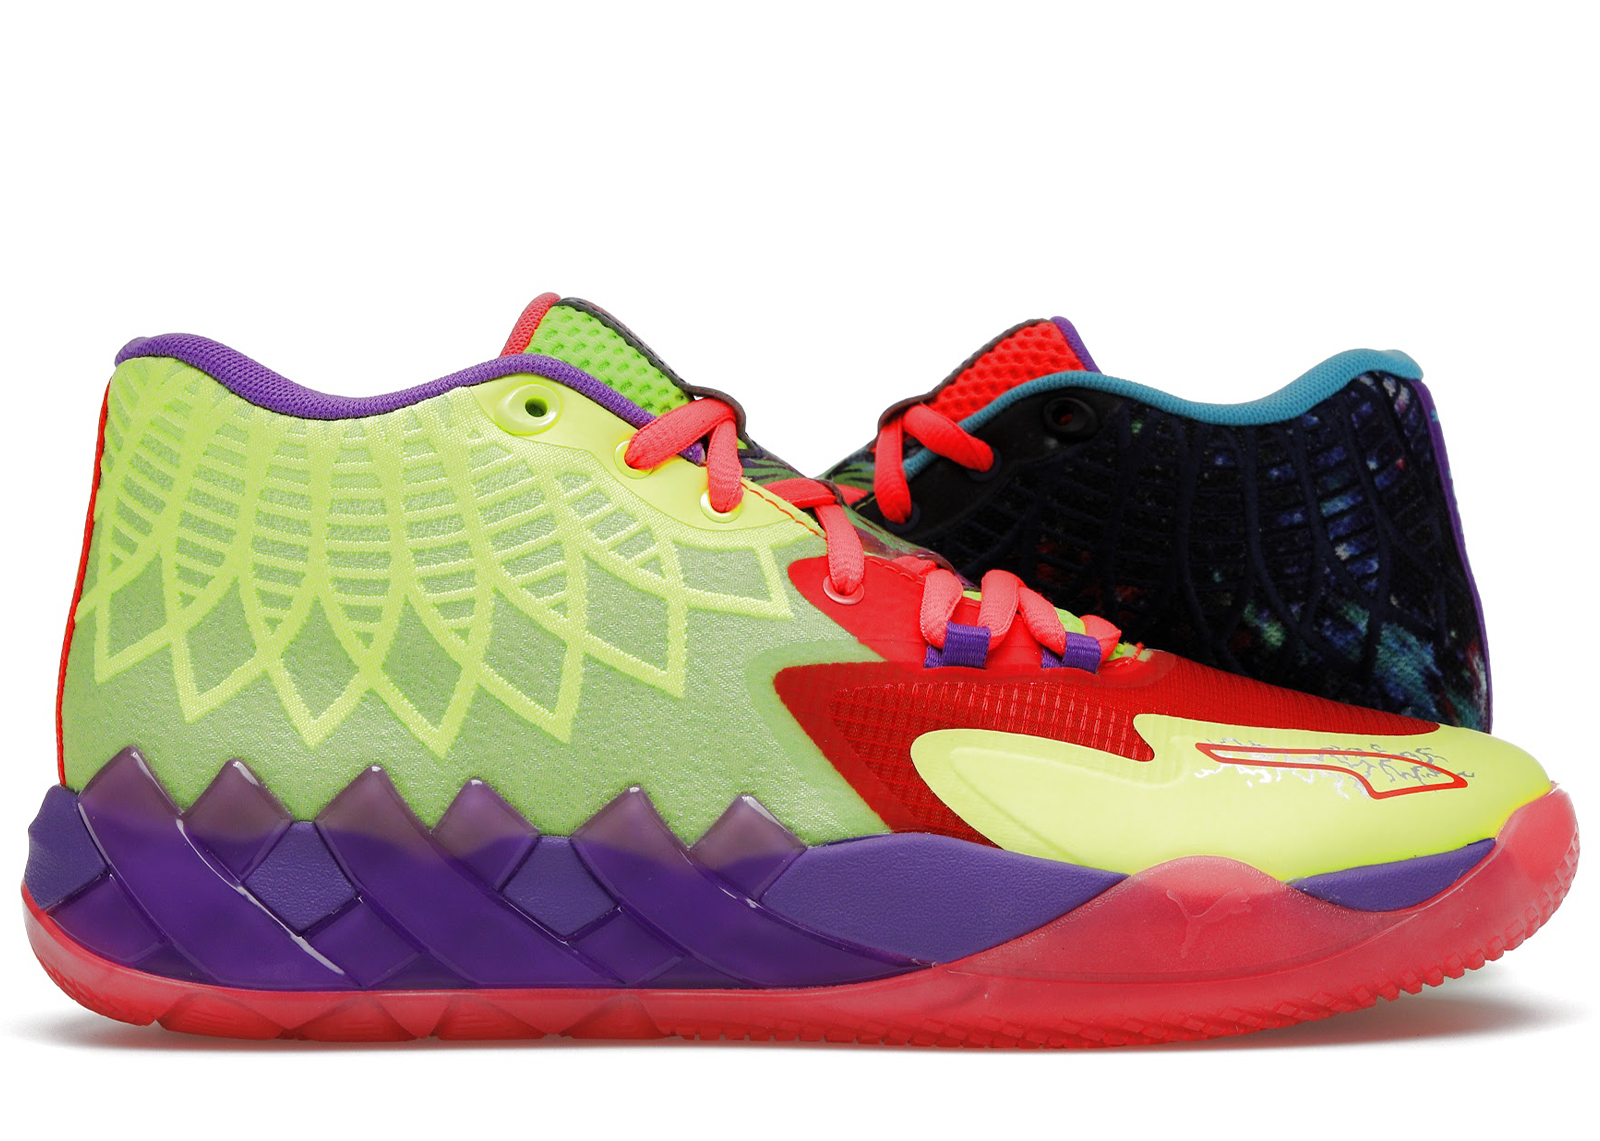 Puma LaMelo Ball MB.01 Be You - 376813-01 - TW